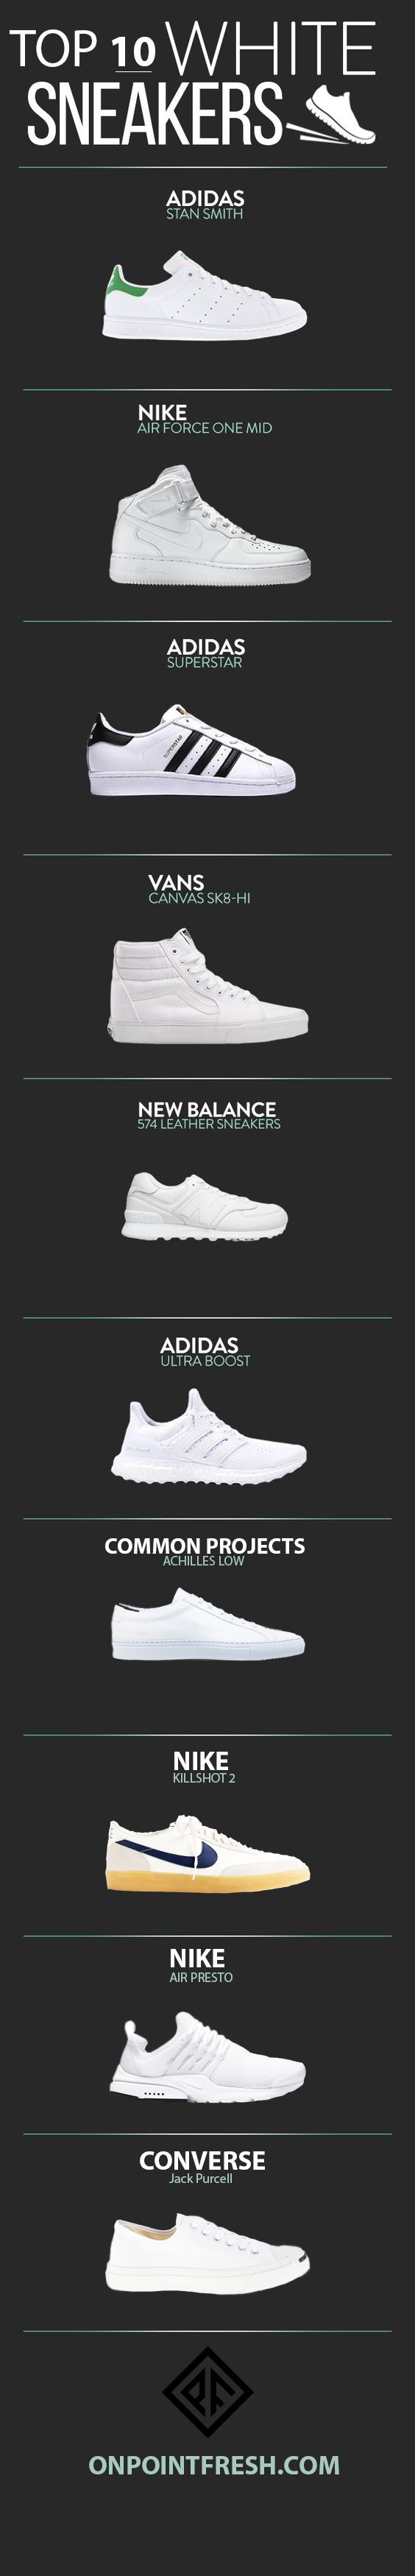 top-10-white-sneakers-infographic...